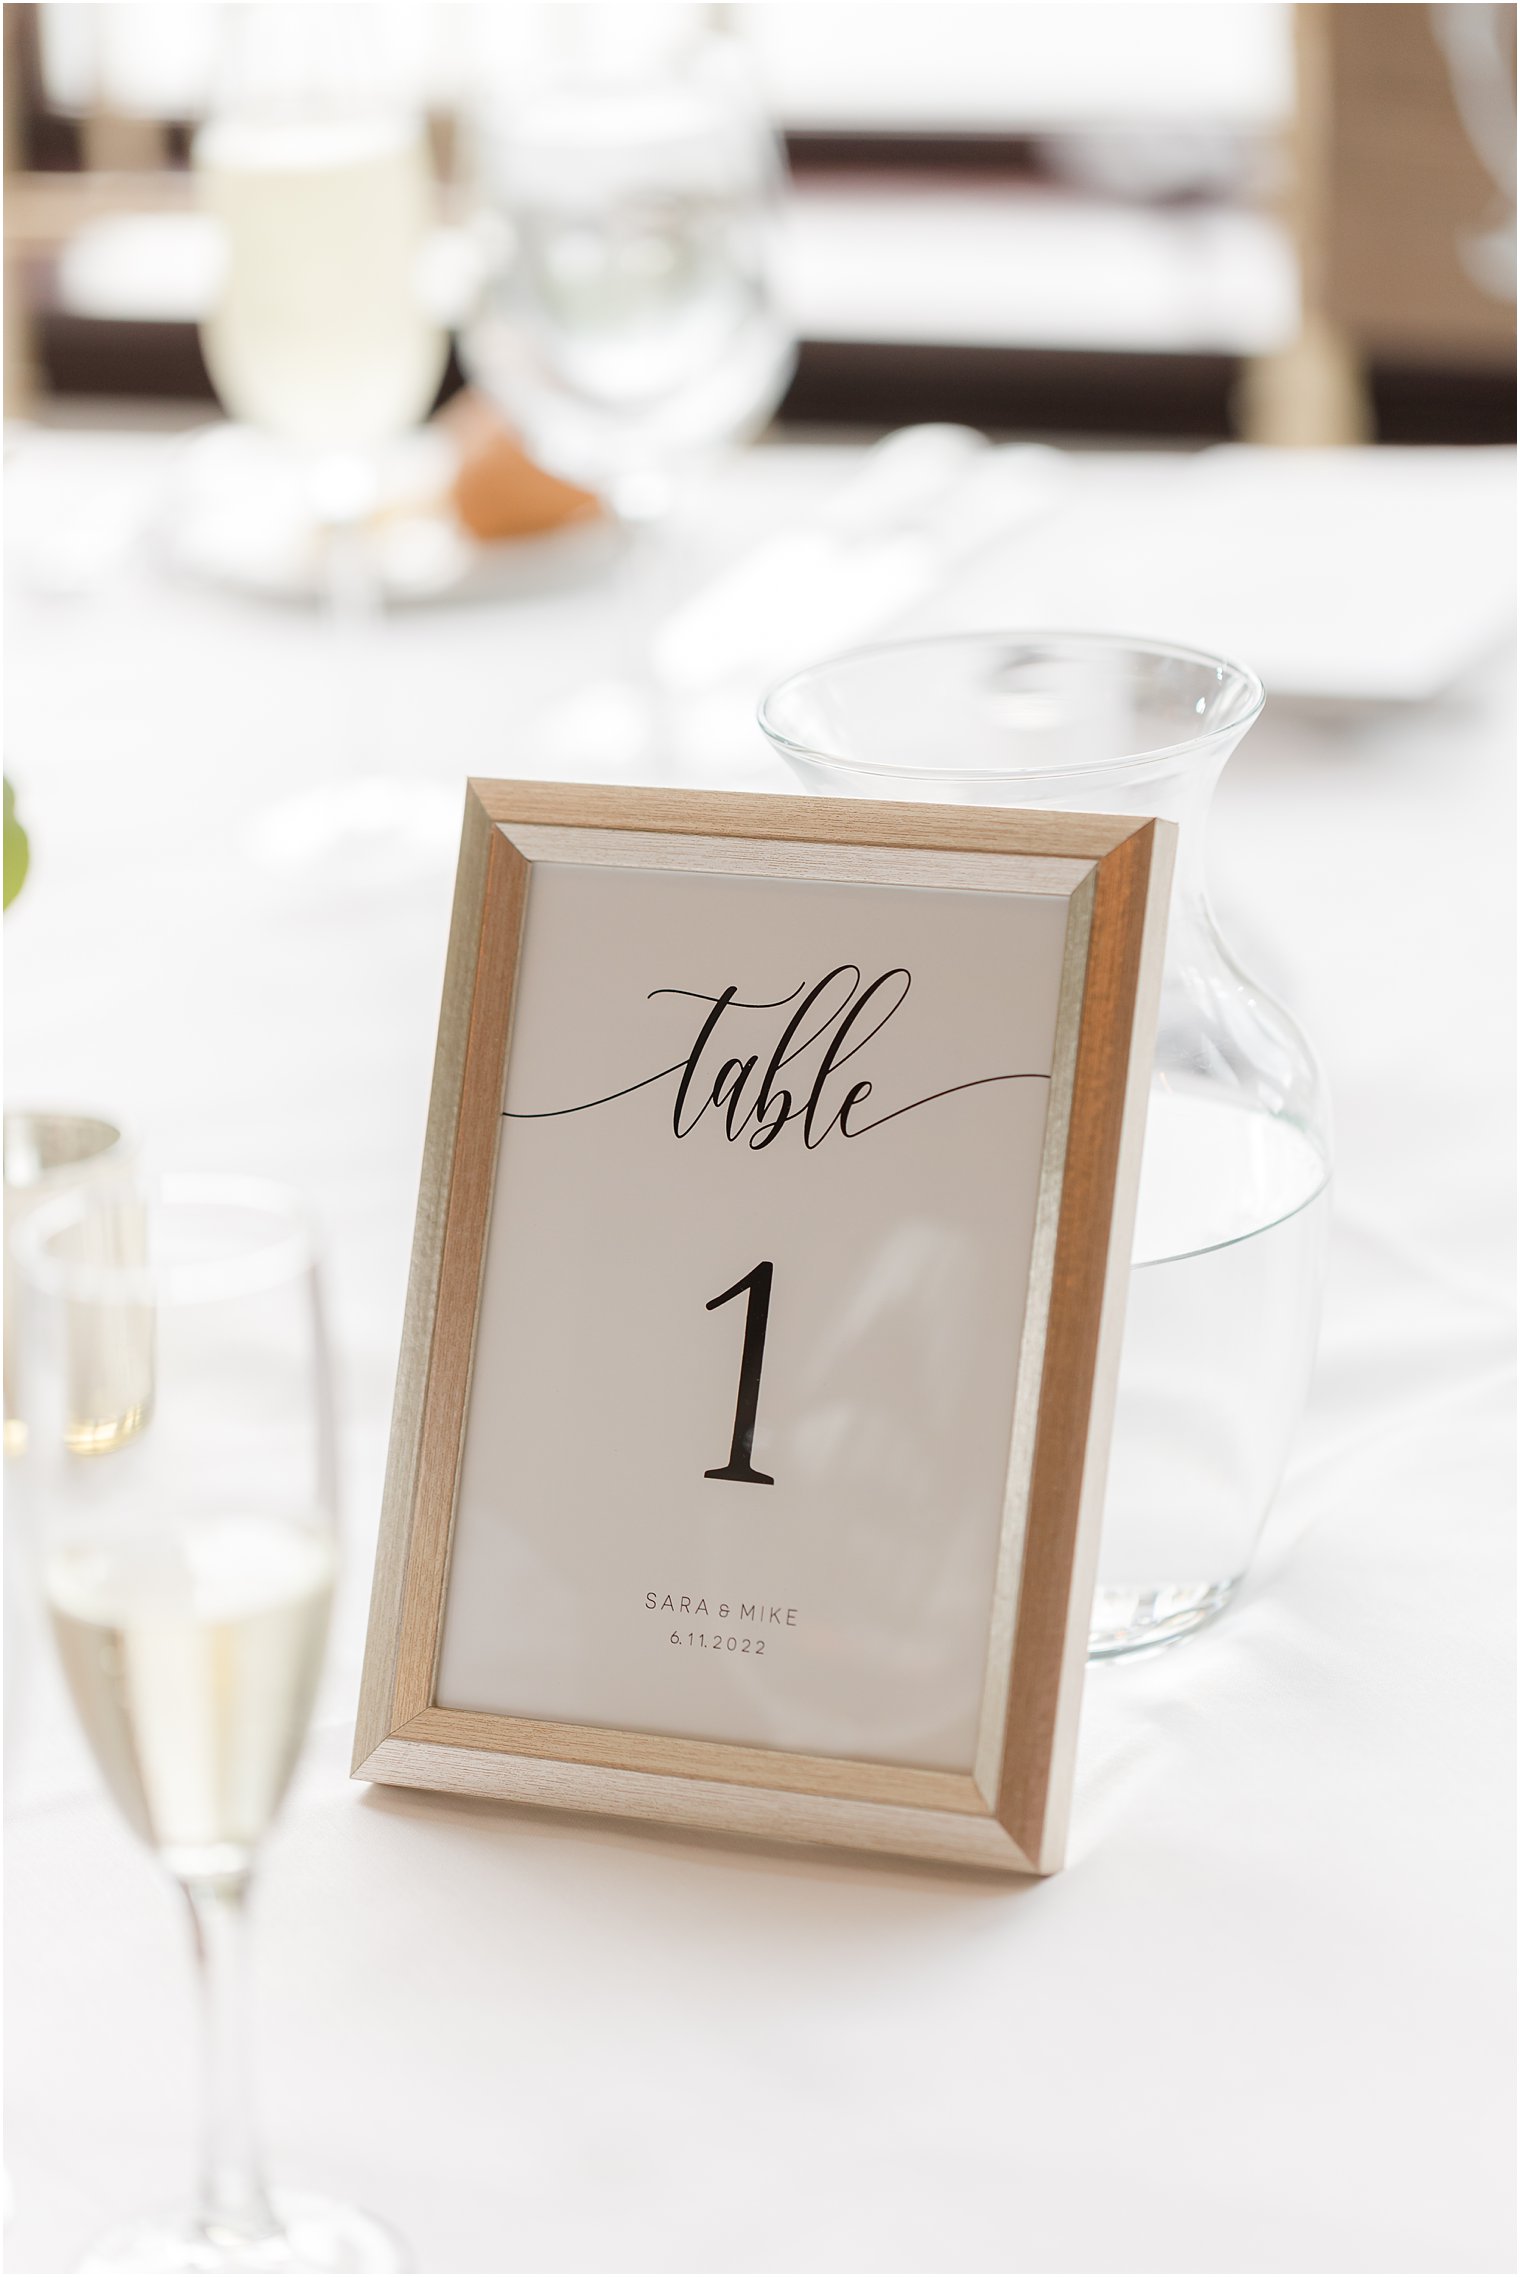 gold table numbers for Spring Brook Country Club wedding reception 